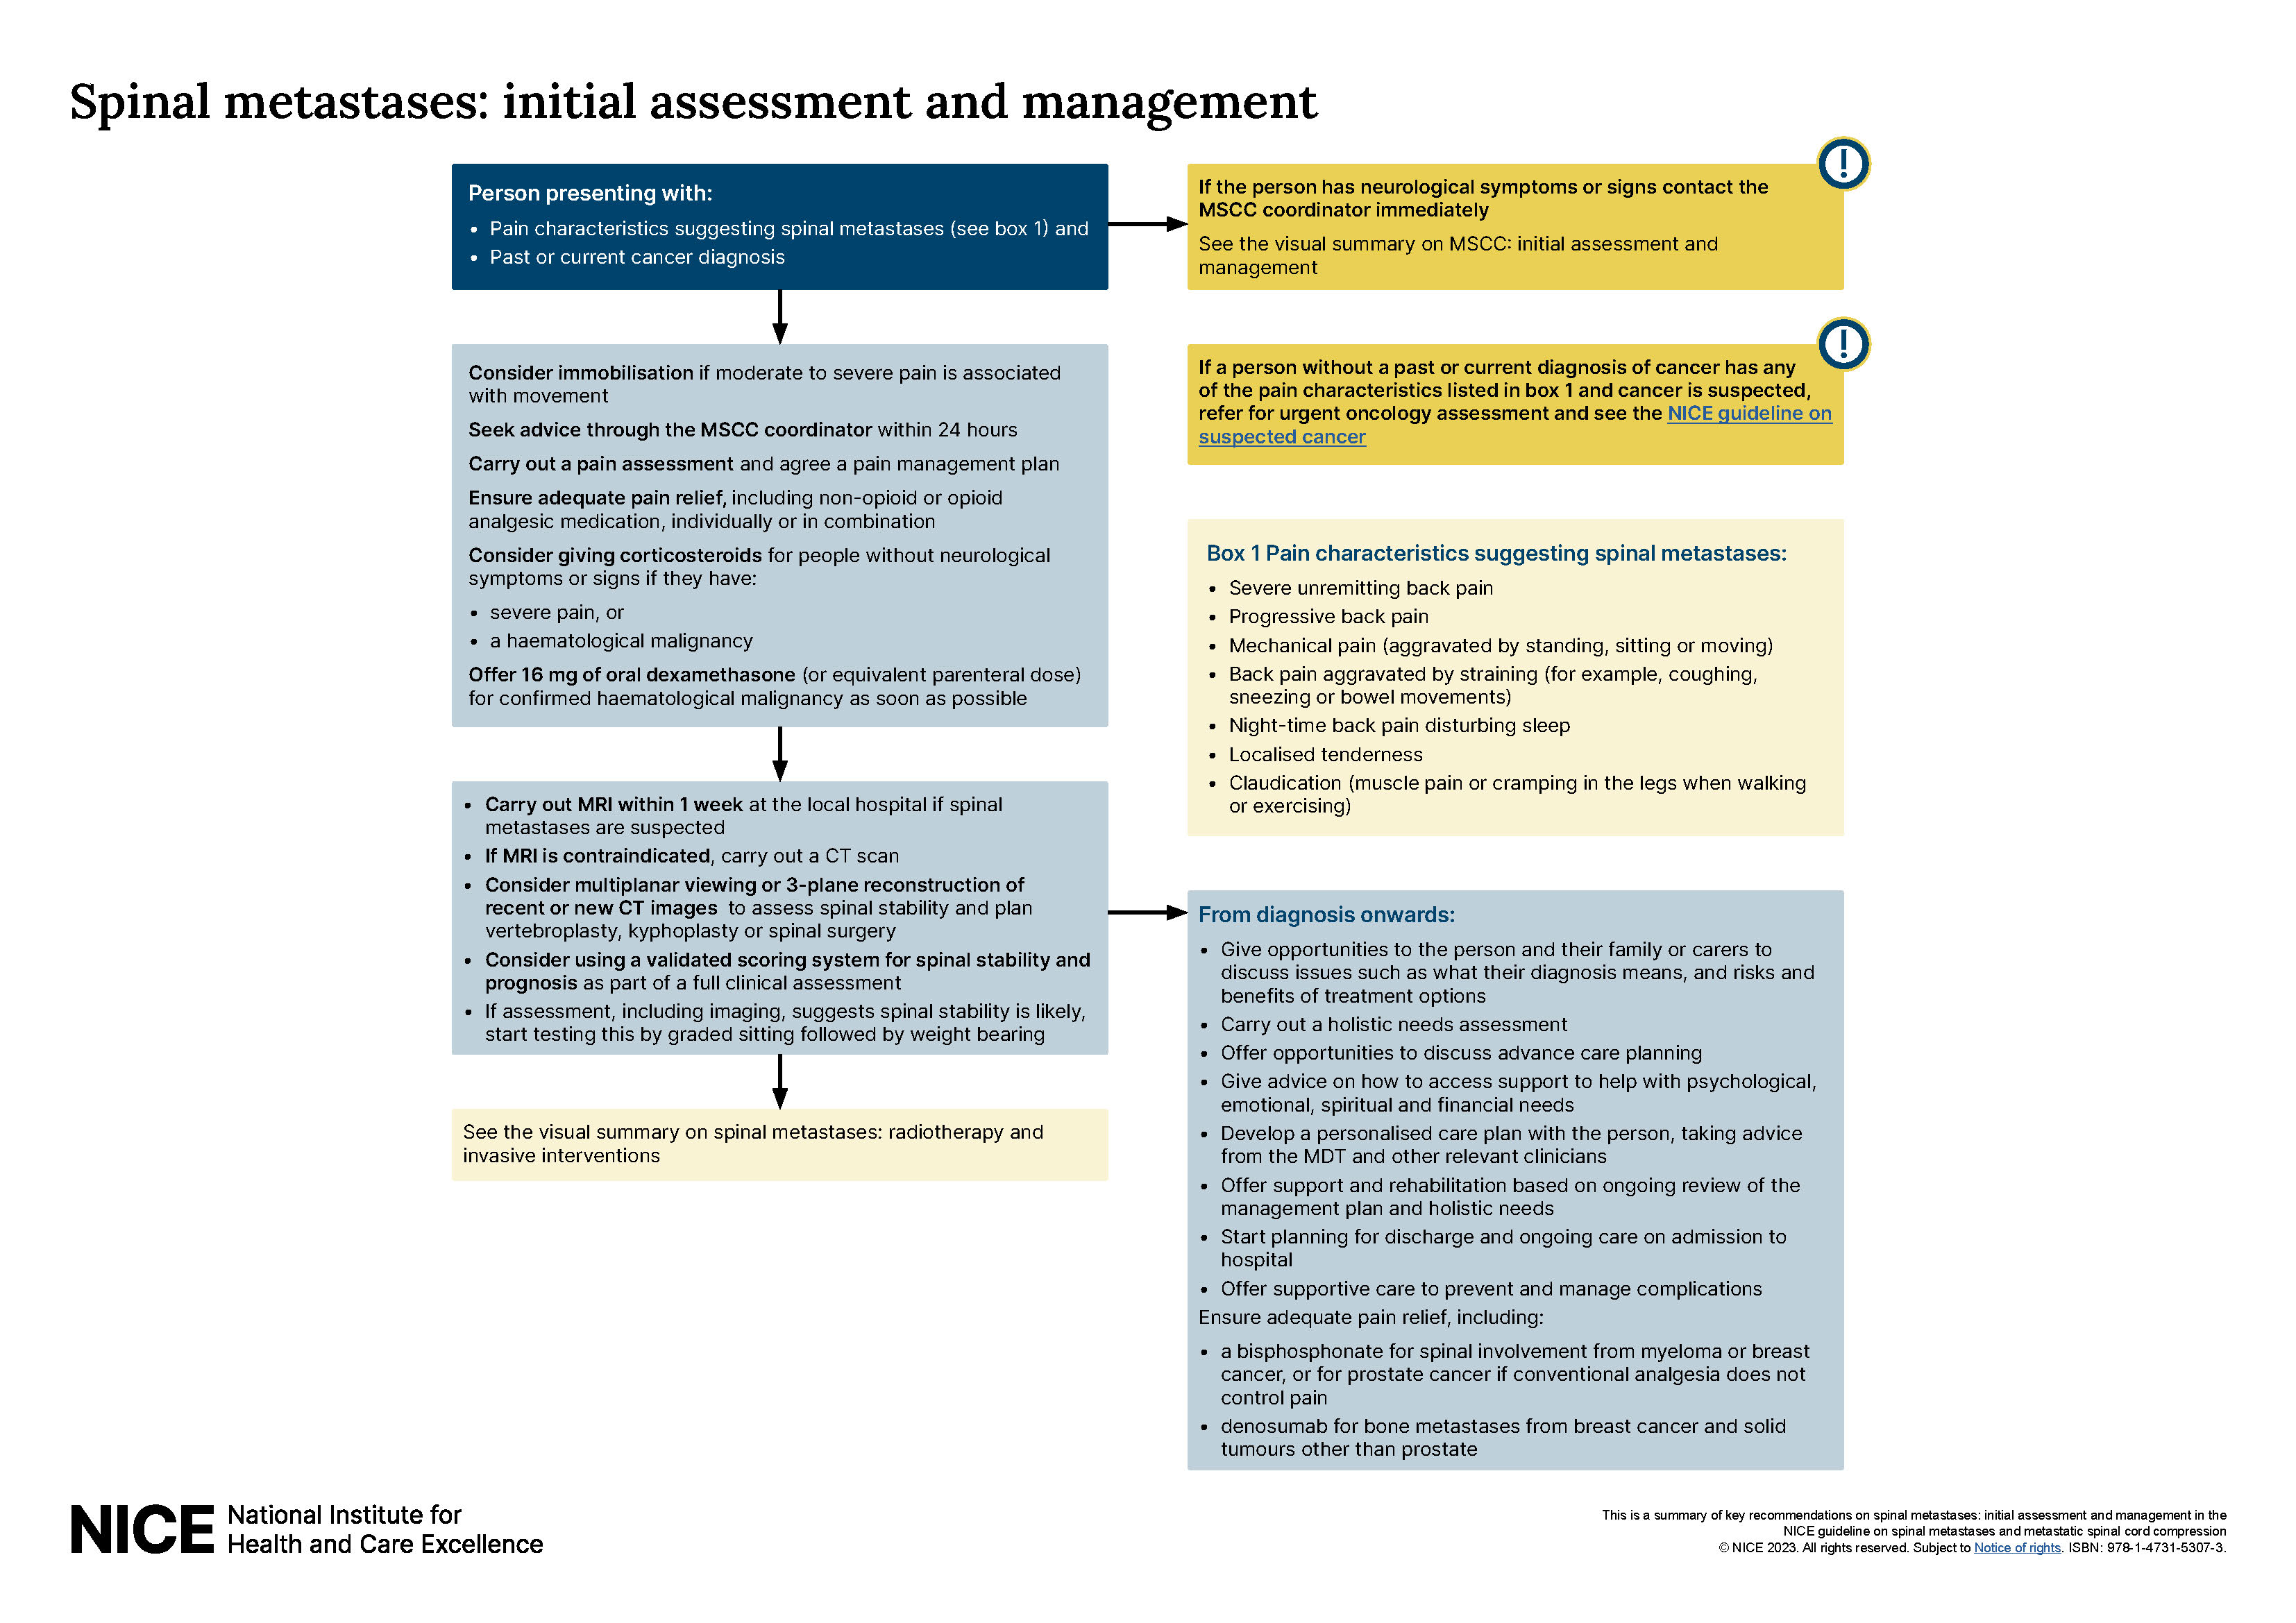 View visual summary on spinal metastases: initial assessment and management